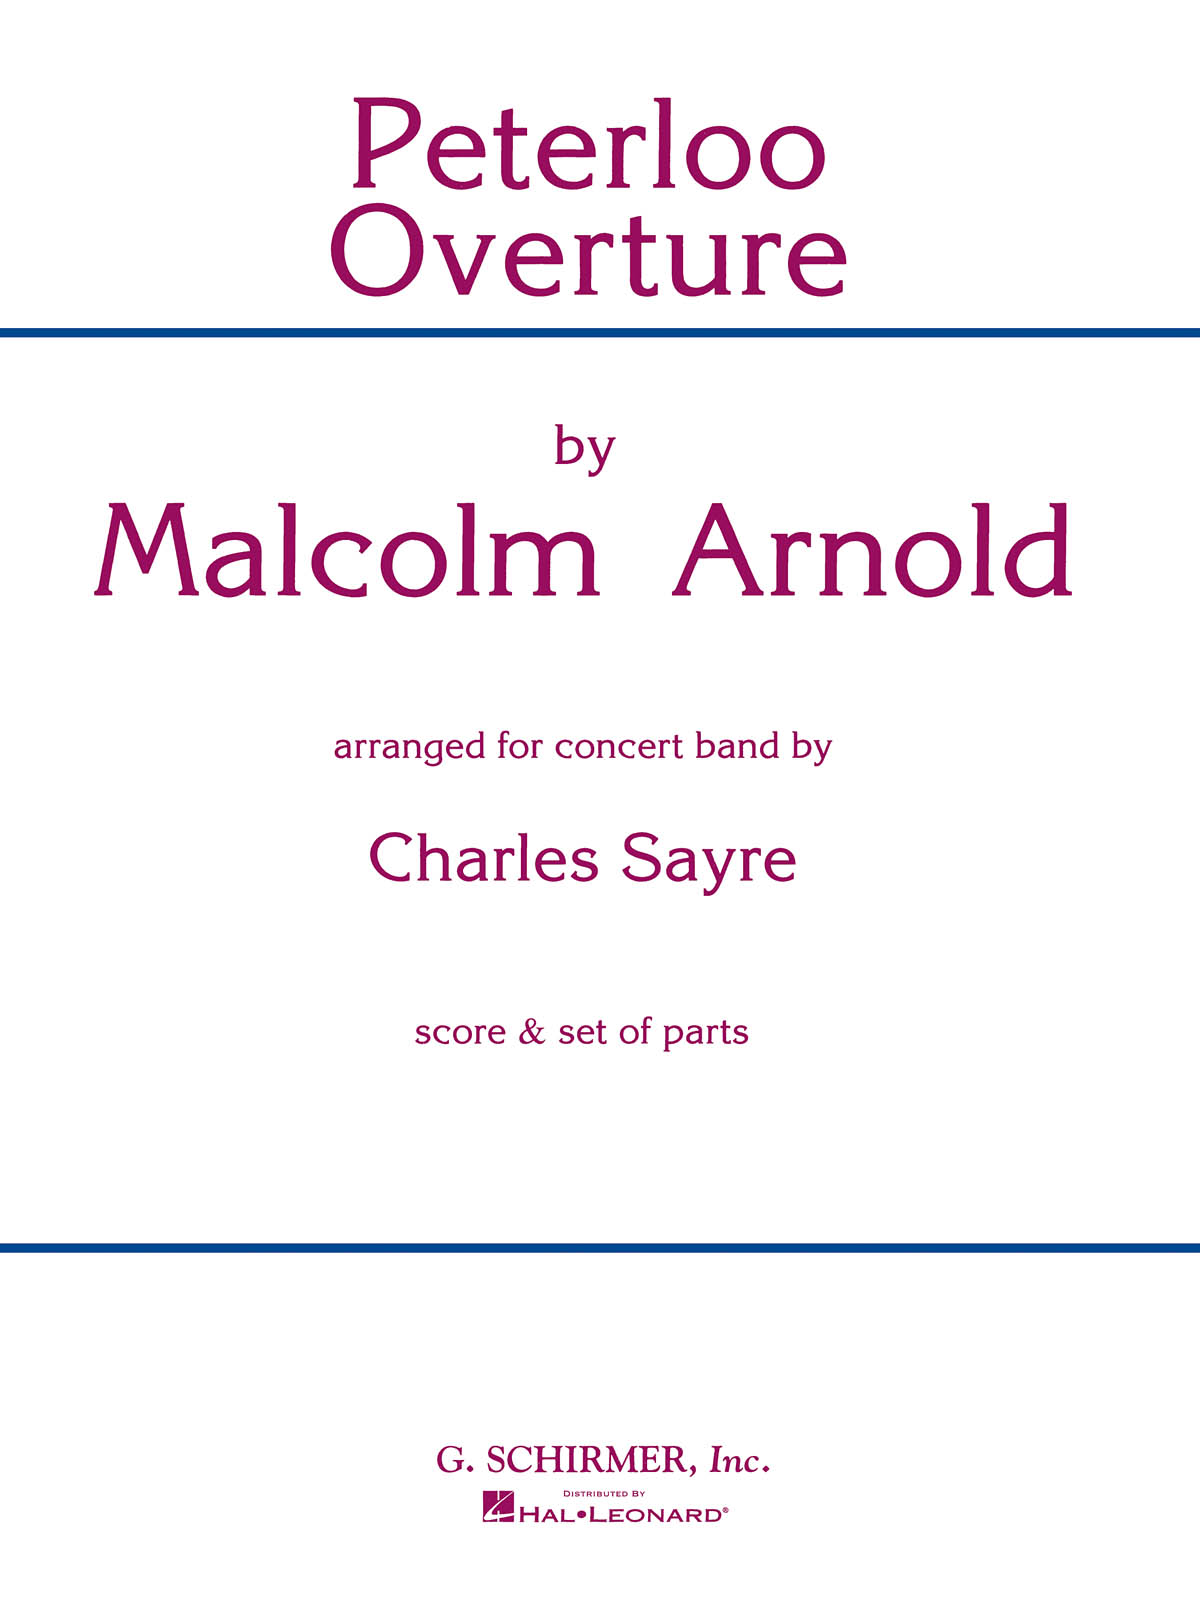 Malcolm Arnold: Peterloo Overture: Concert Band: Score and Parts